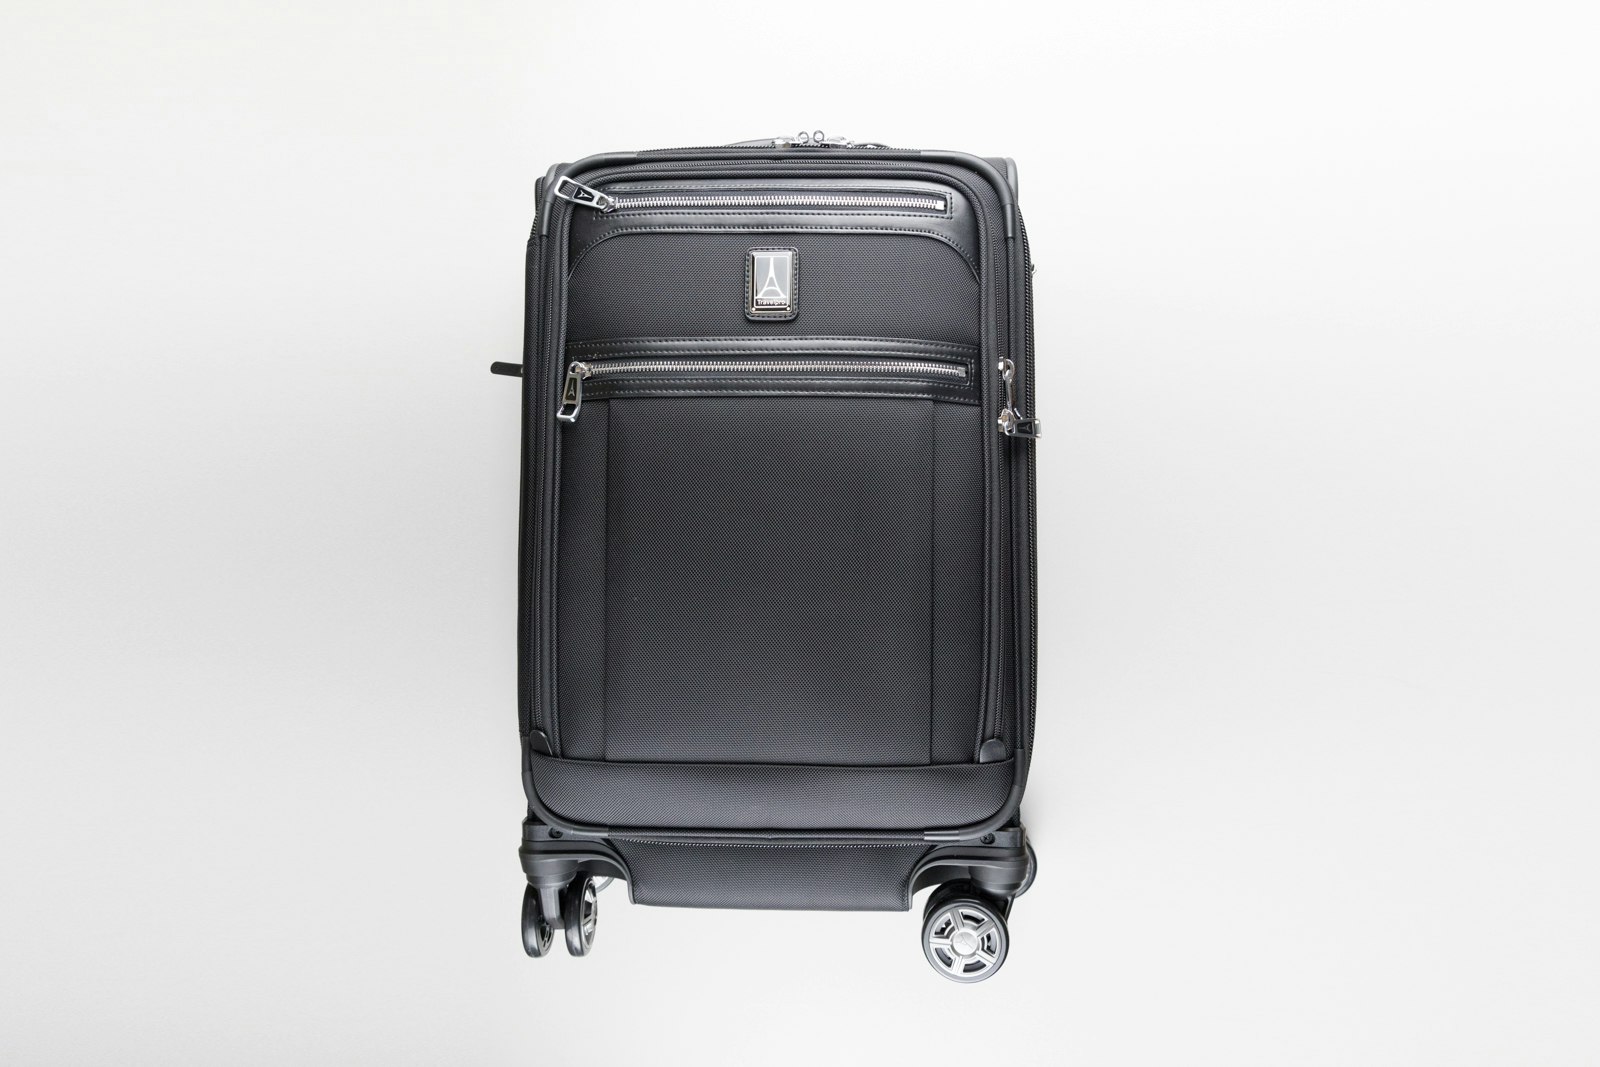 A product shot of the Travelpro Luggage Crew Spinner